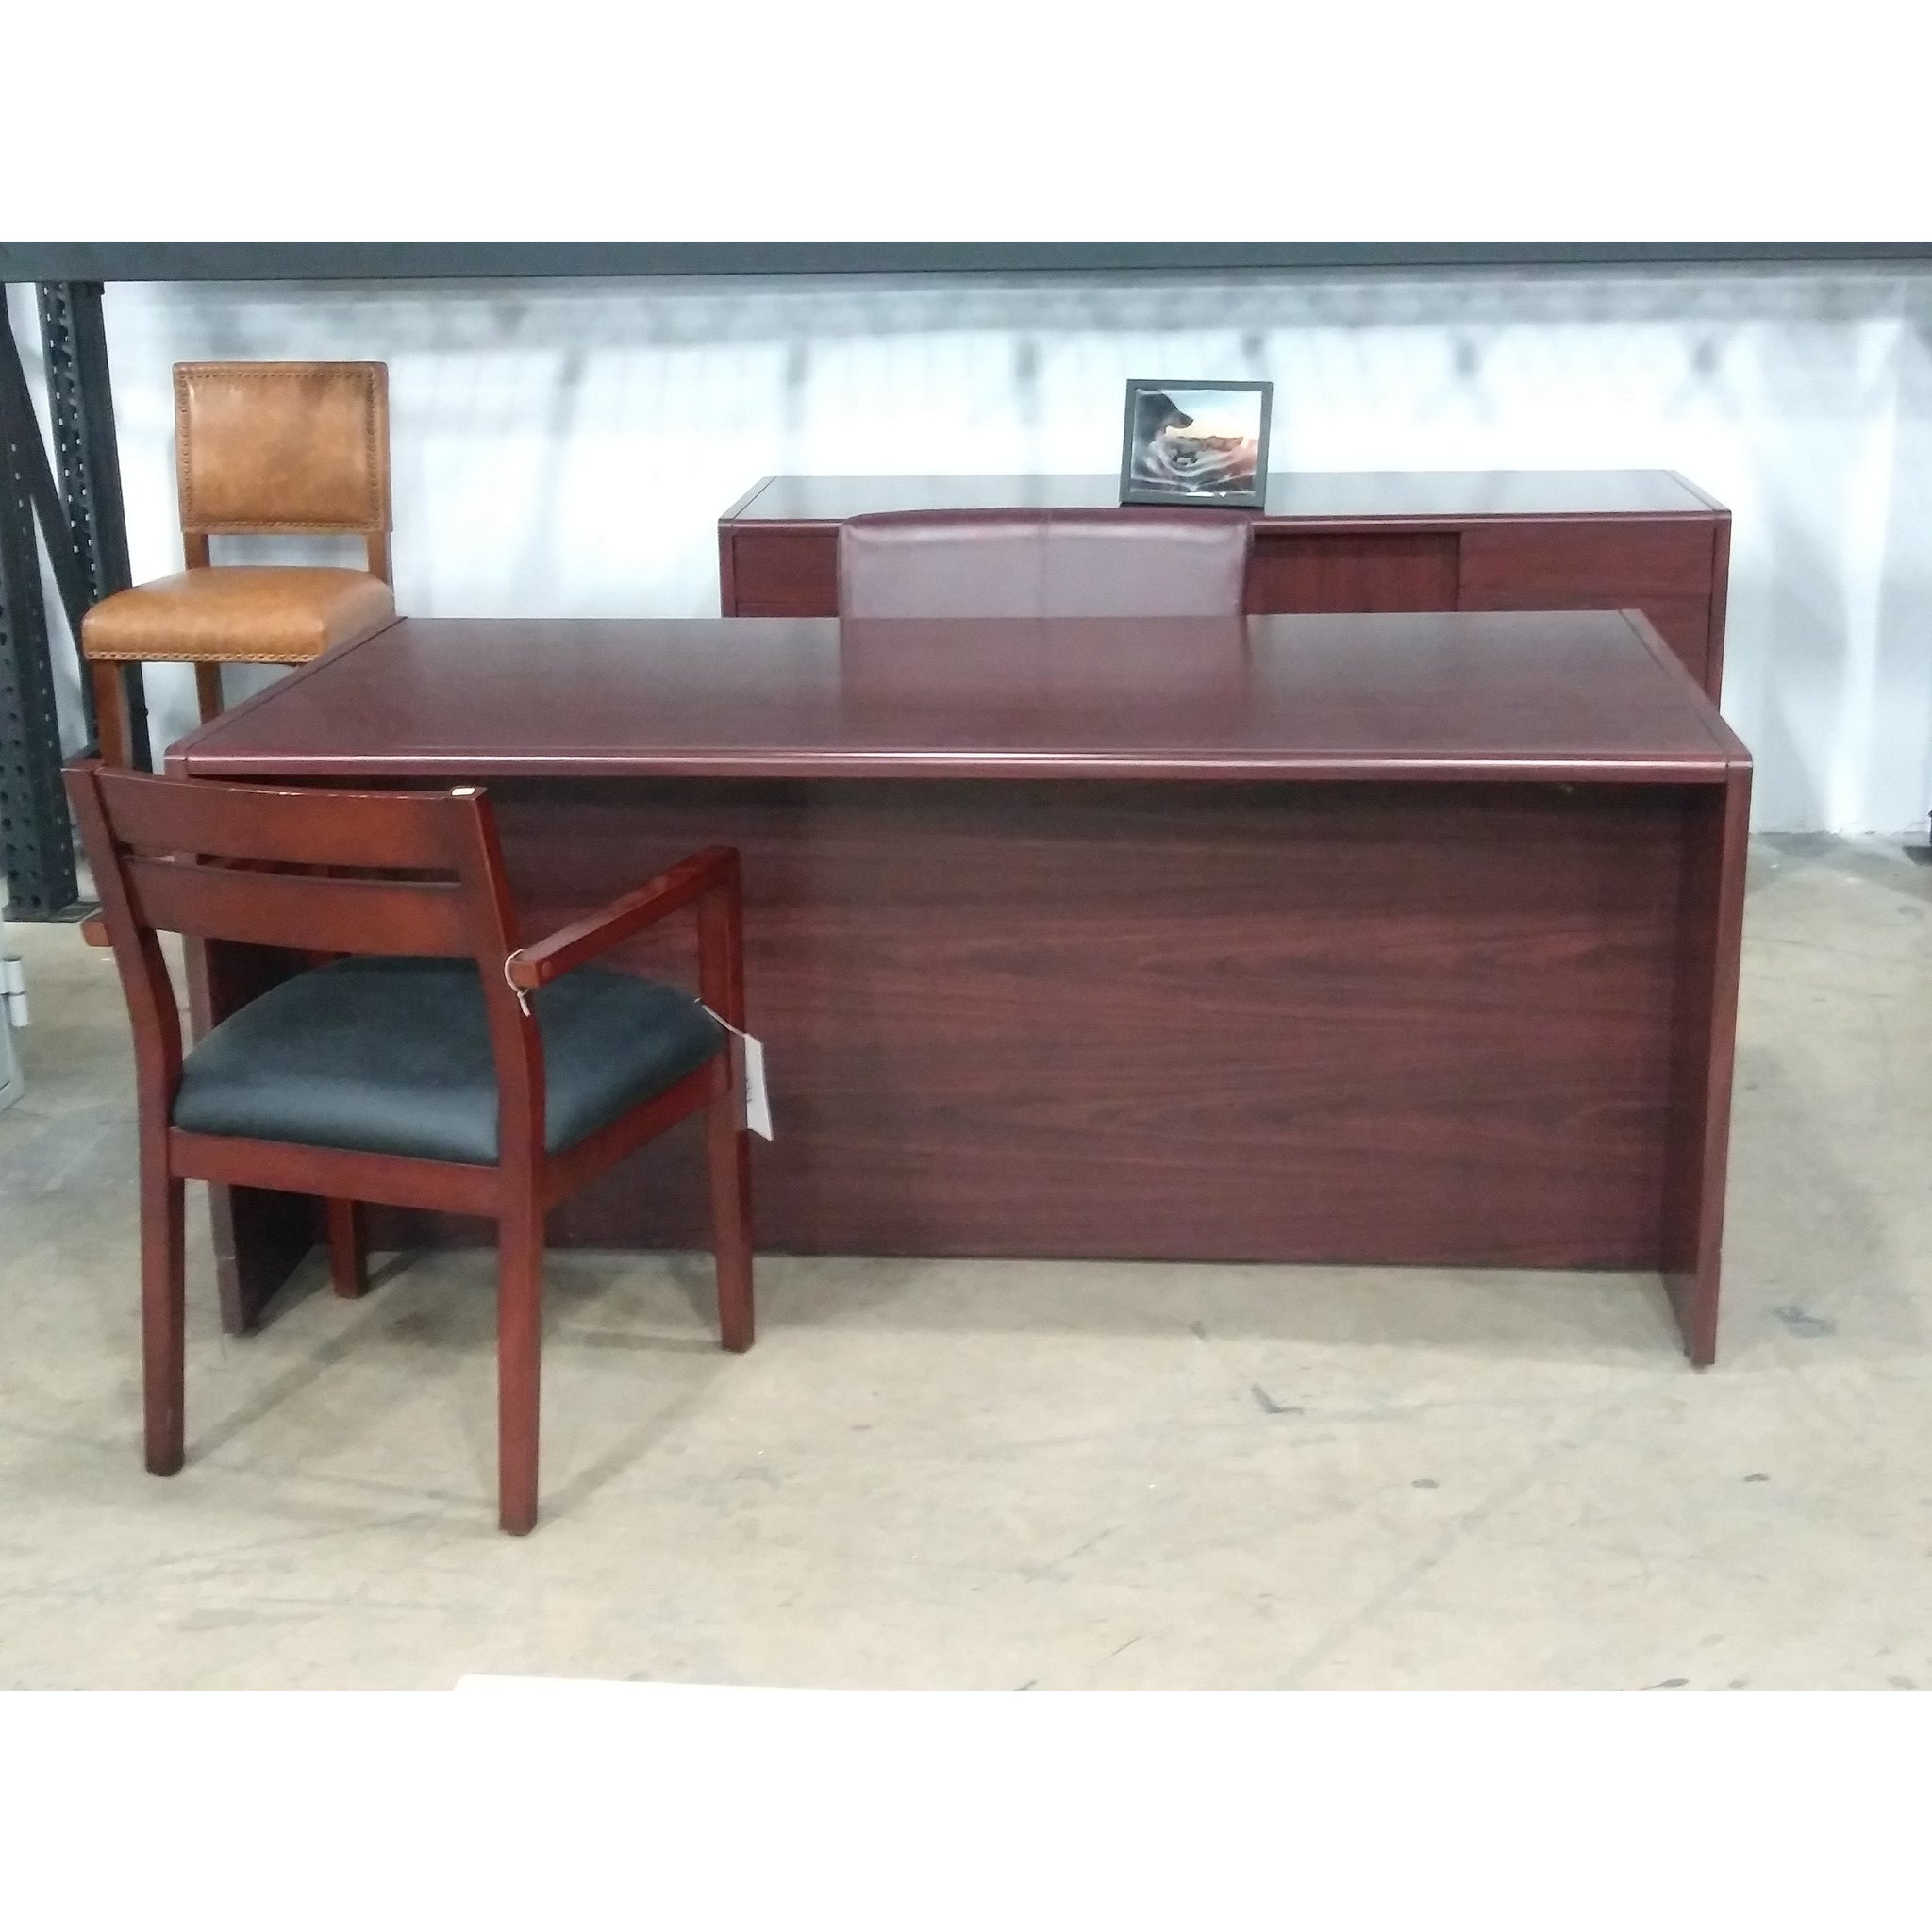 Pre Owned 72 Mahogany Desk And Credenza Set Office Furniture 4 Sale